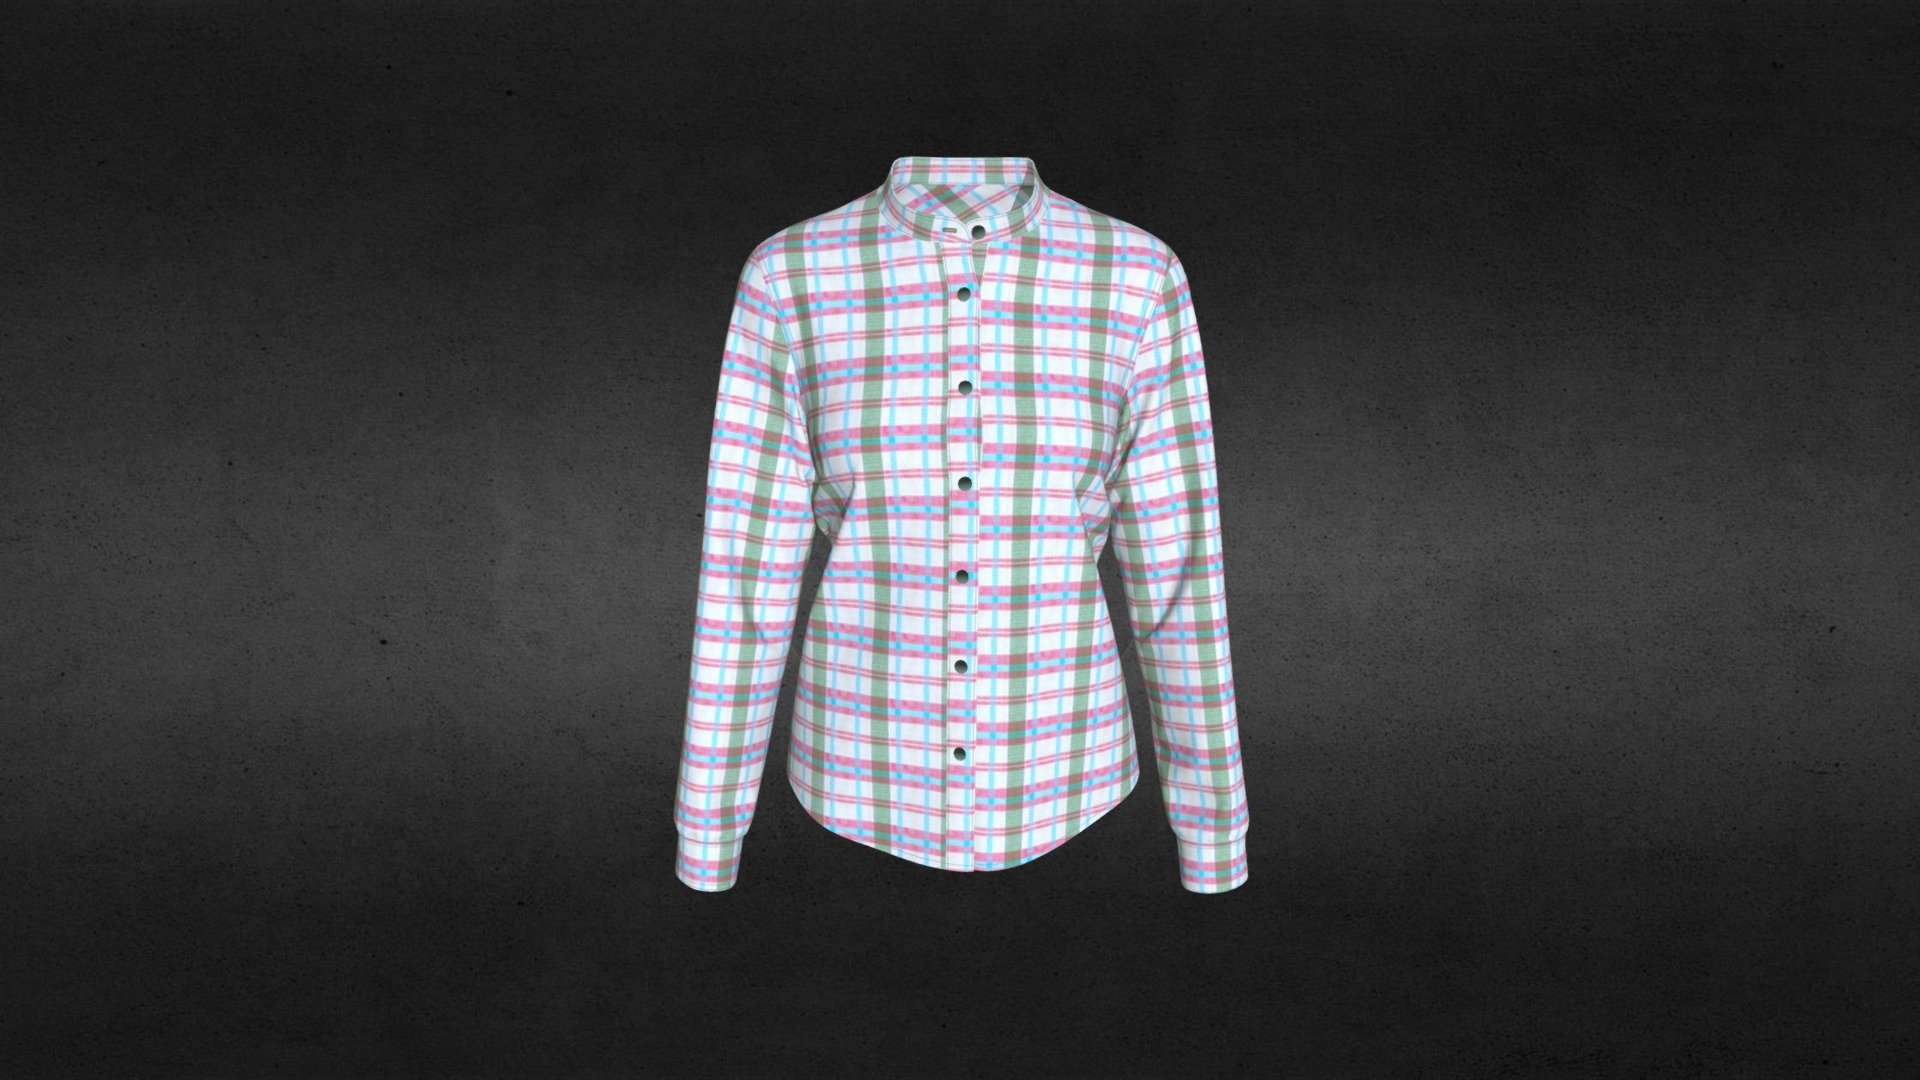 Cloth Title = Women Long Sleeve Casual Shirts New Arrival 

SKU = DG100023 

Category = Women 

Product Type = Shirt 

Cloth Length = Regular 

Body Fit = Regular Fit 

Occasion = Casual  

Sleeve Style = Long Sleeve 


Our Services:

3D Apparel Design

OBJ,FBX,GLTF Making with High/Low Poly

Fabric Digitalization

Mockup making

3D Teck Pack

Pattern Making

2D Illustration

Cloth Animation and 360 Spin Video


Contact us:- 

Email: info@digitalfashionwear.com 

Website: https://digitalfashionwear.com 

WhatsApp No: +8801759350445 


We designed all the types of cloth specially focused on product visualization,e-commerce, fitting, and production. 

We will design: 

T-shirts 

Polo shirts 

Hoodies 

Sweatshirt 

Jackets 

Shirts 

TankTops 

Trousers 

Bras 

Underwear 

Blazer 

Aprons 

Leggings 

and All Fashion items 





Our goal is to make sure what we provide you, meets your demand 3d model